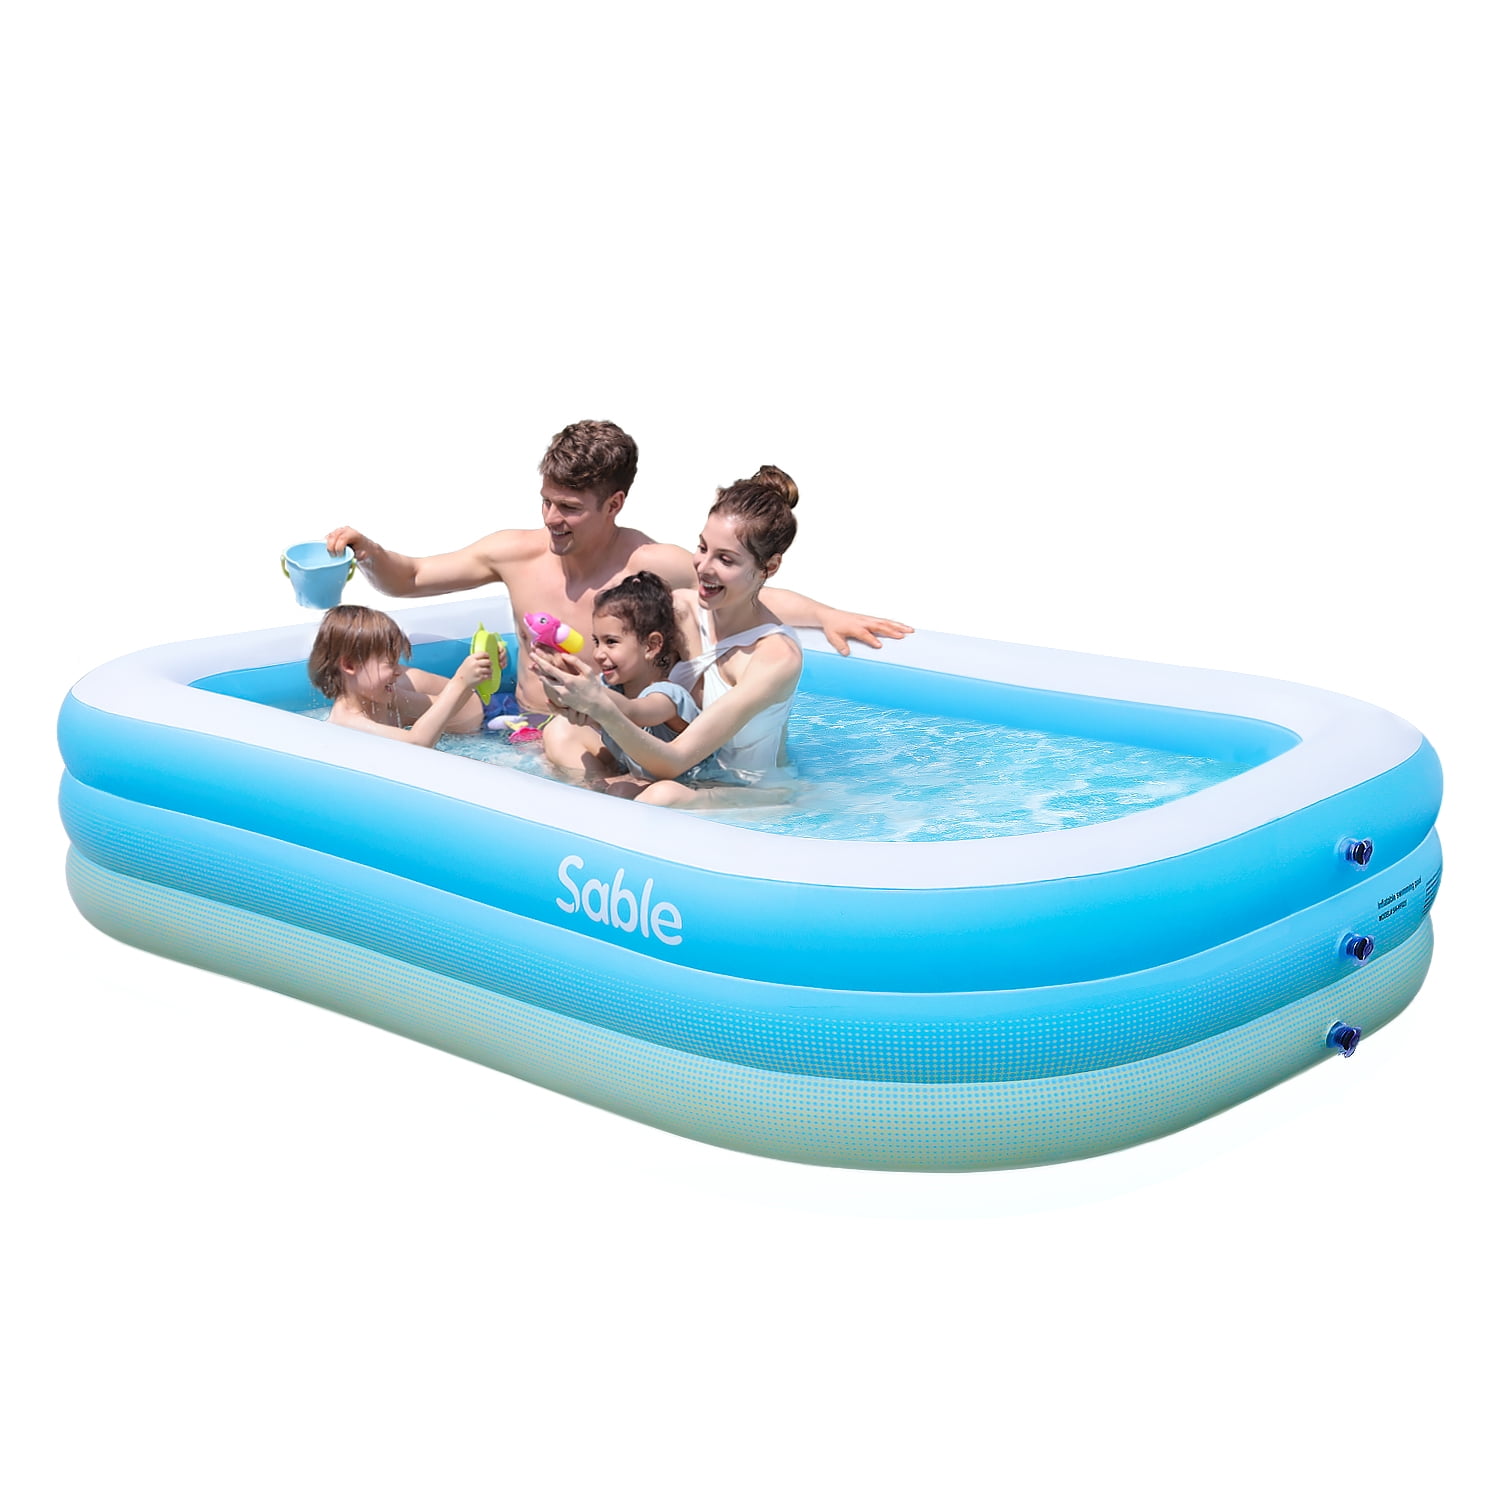 Sable Inflatable Pool, Rectangular Swimming Pools for Kids, Adult, Family,  50% Thicker, 7.68 x 4.66 x 1.67 ft